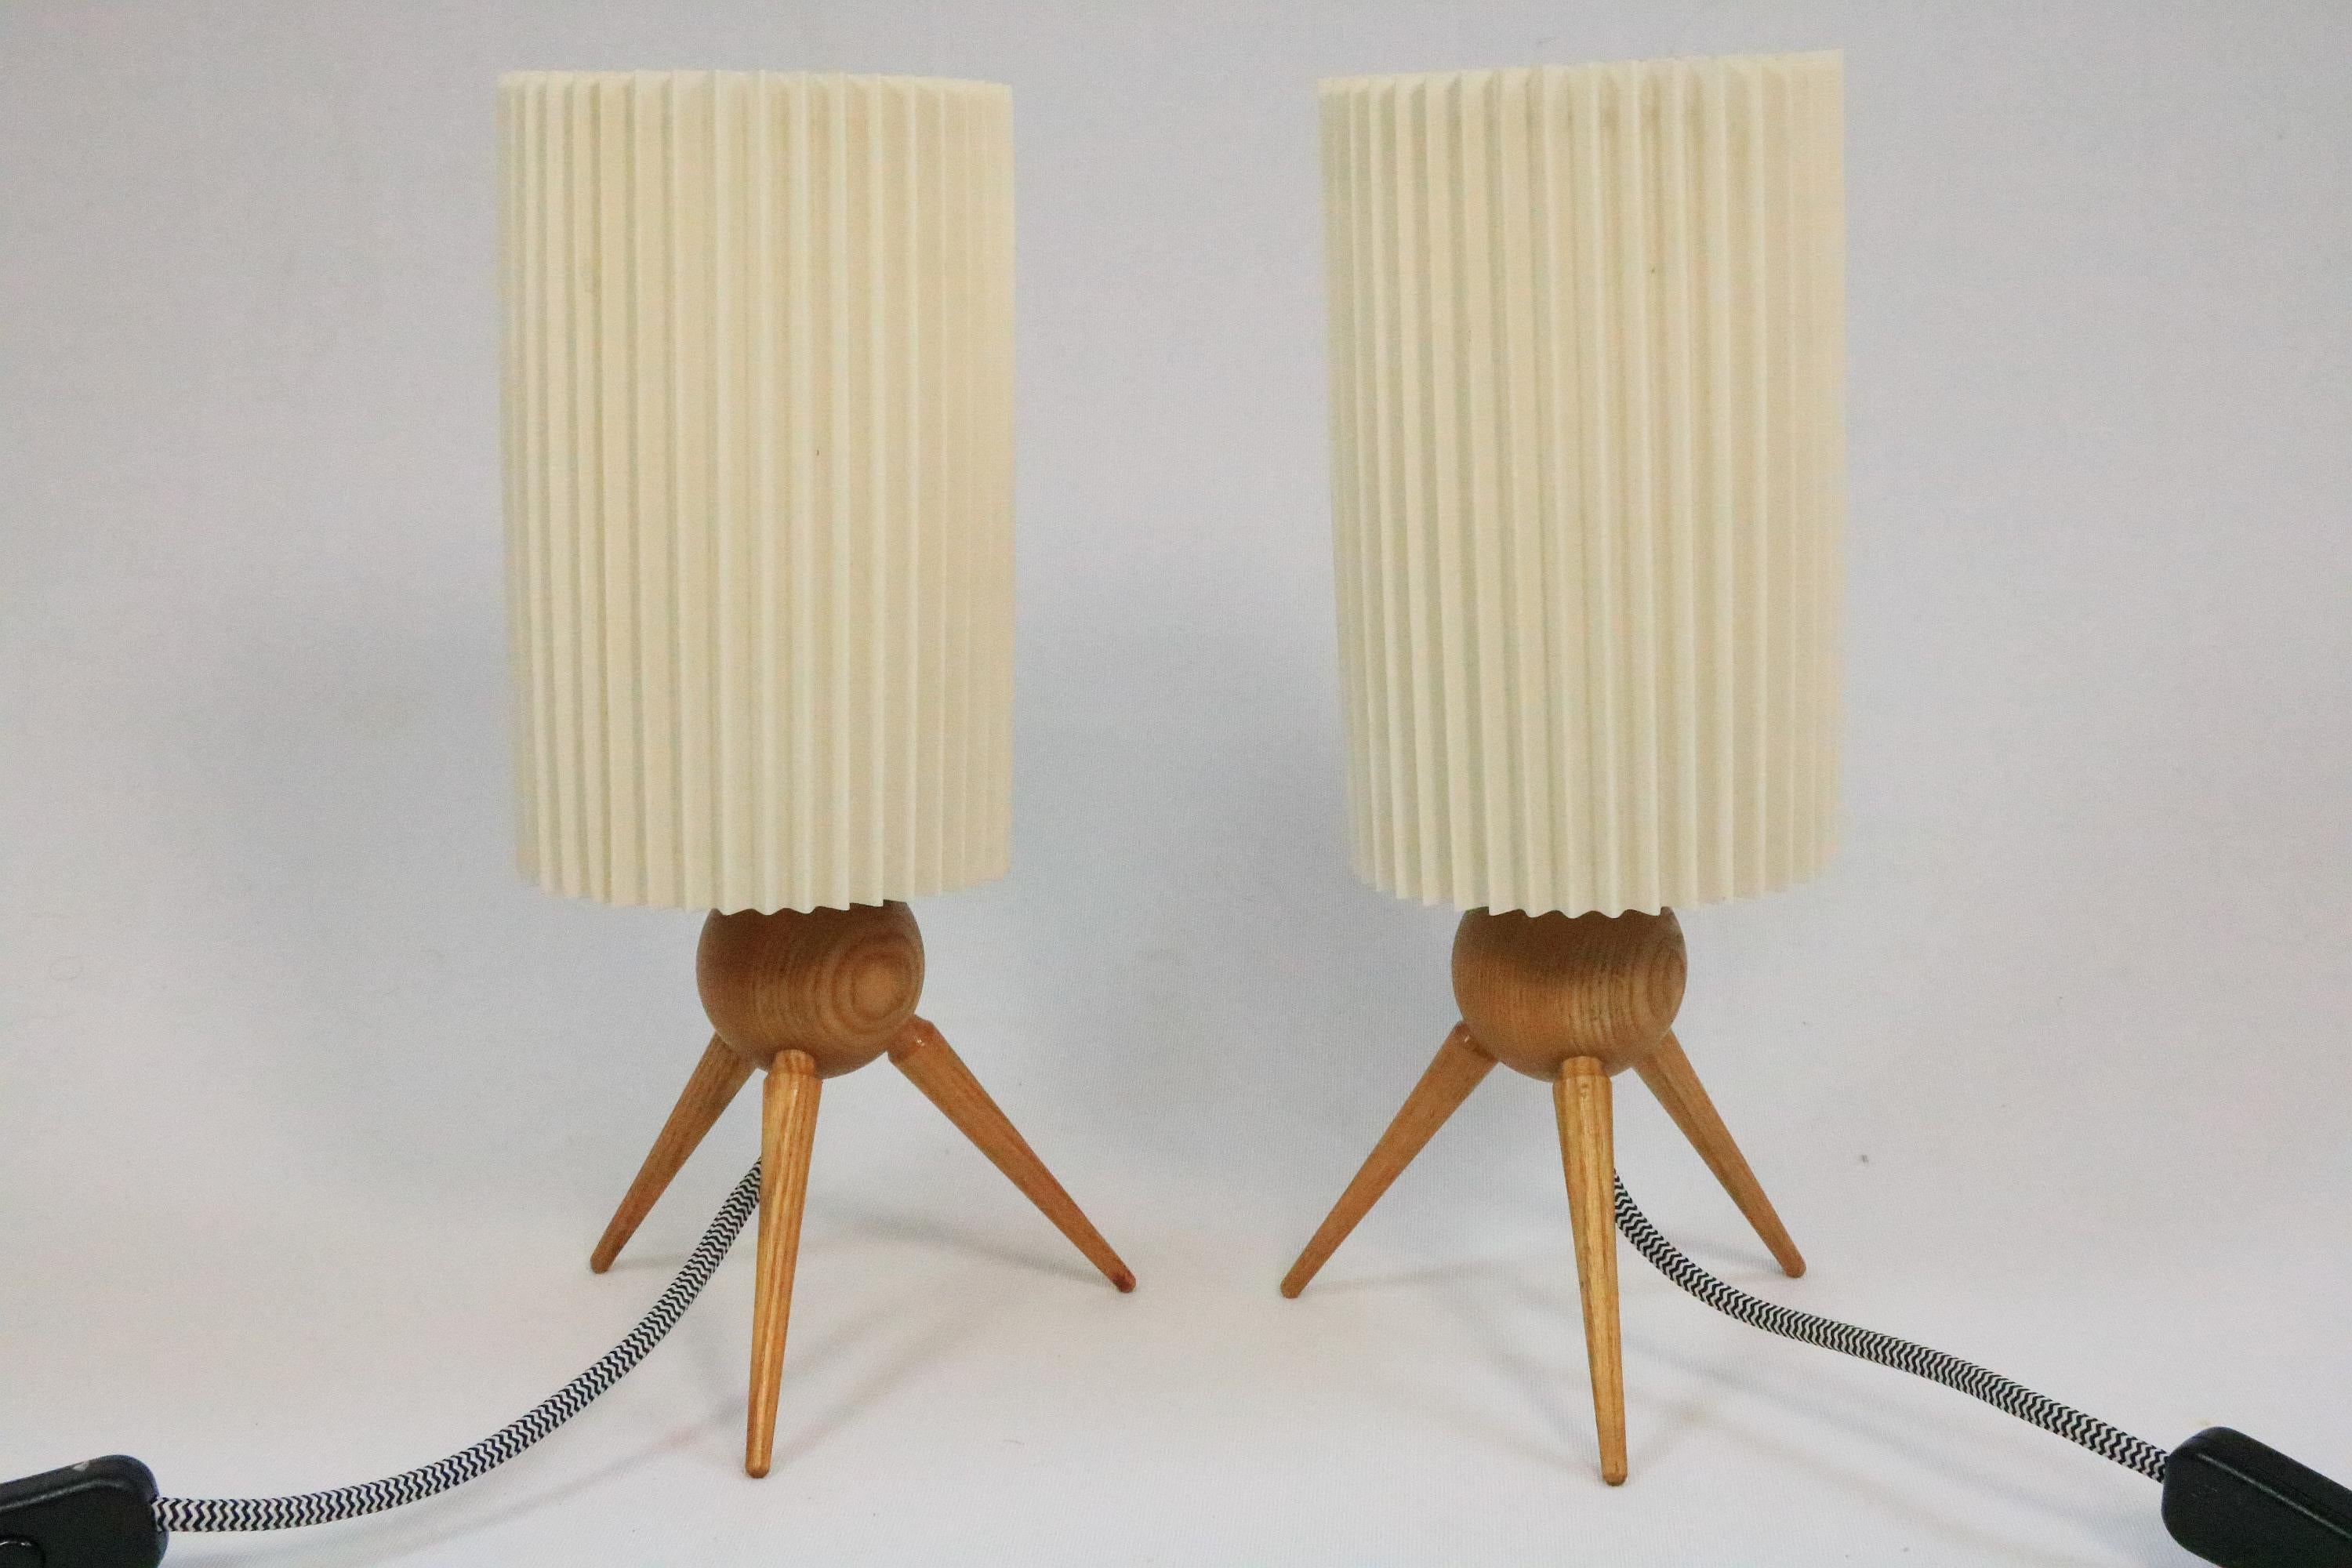 Two very charming table lamps, originals from the 1950s.

The cables have been renewed, but with the same design as the original cable (black and white textile cable).

The plissee shades make a pretty light and are well preserved. They were sticked